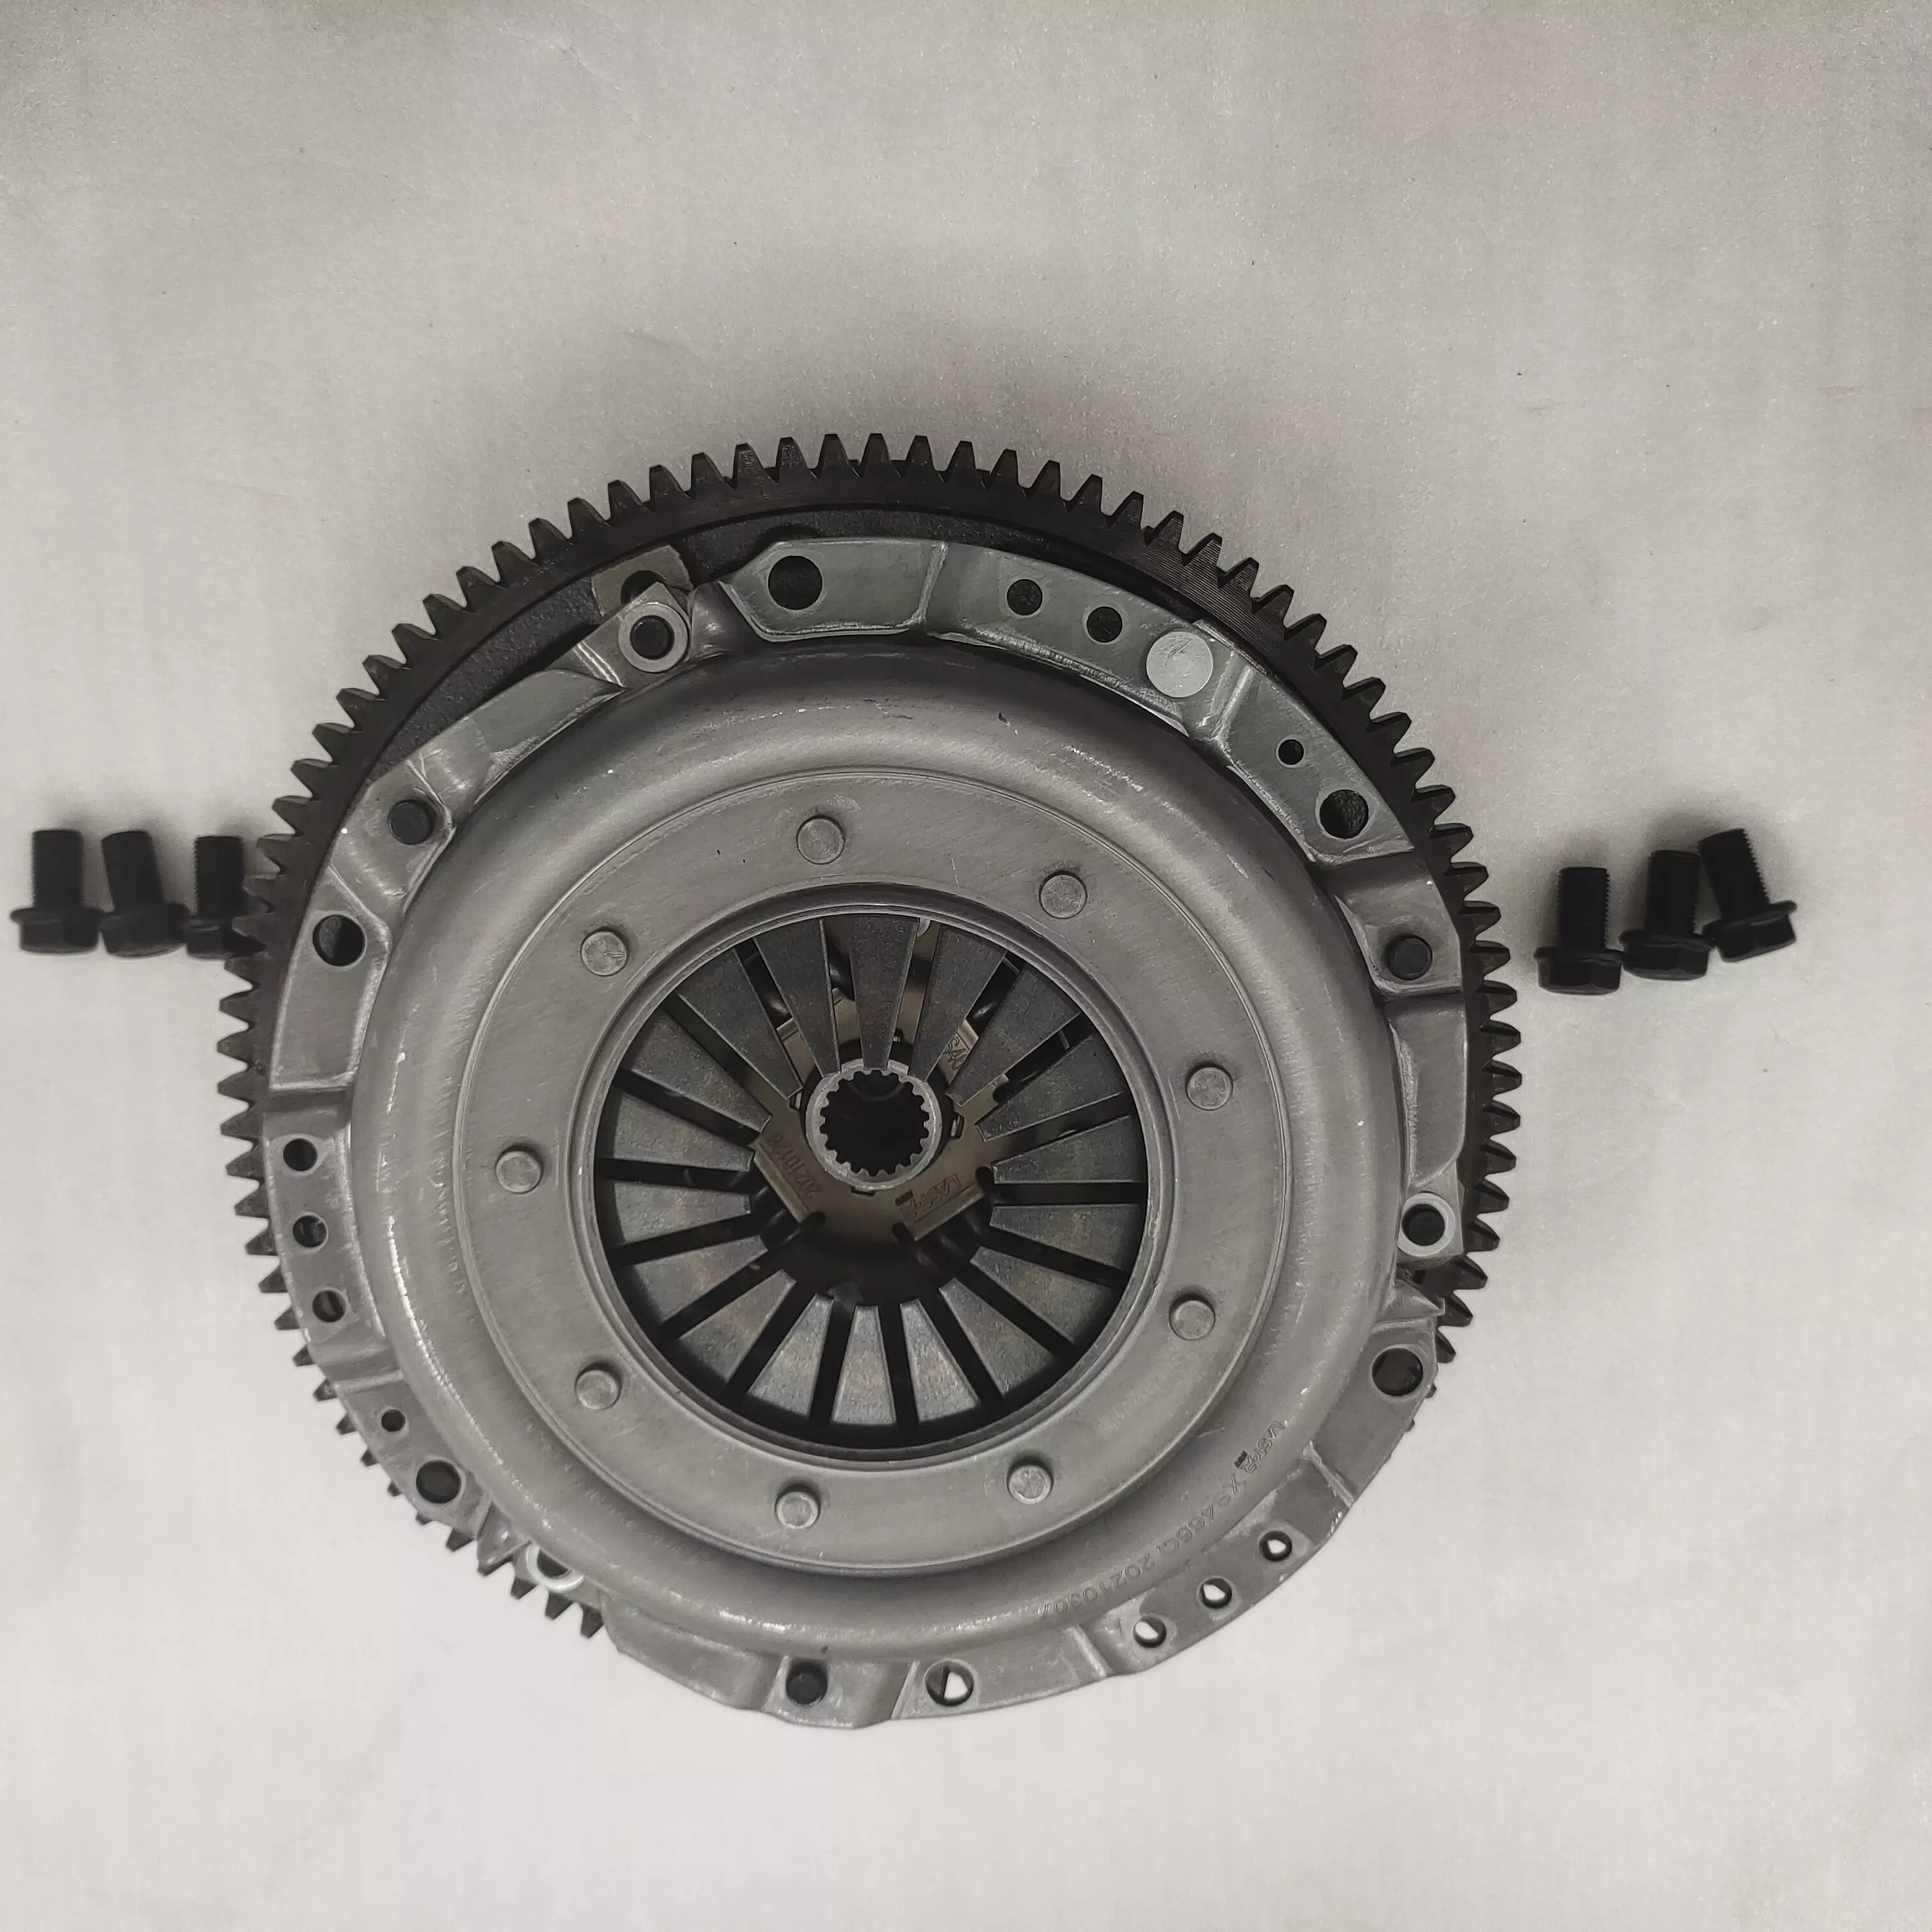 motorcycle 800cc engine Auto engine Genuine  Flywheel clutch Kit assembly tricycle engine parts high quality factory direct sale